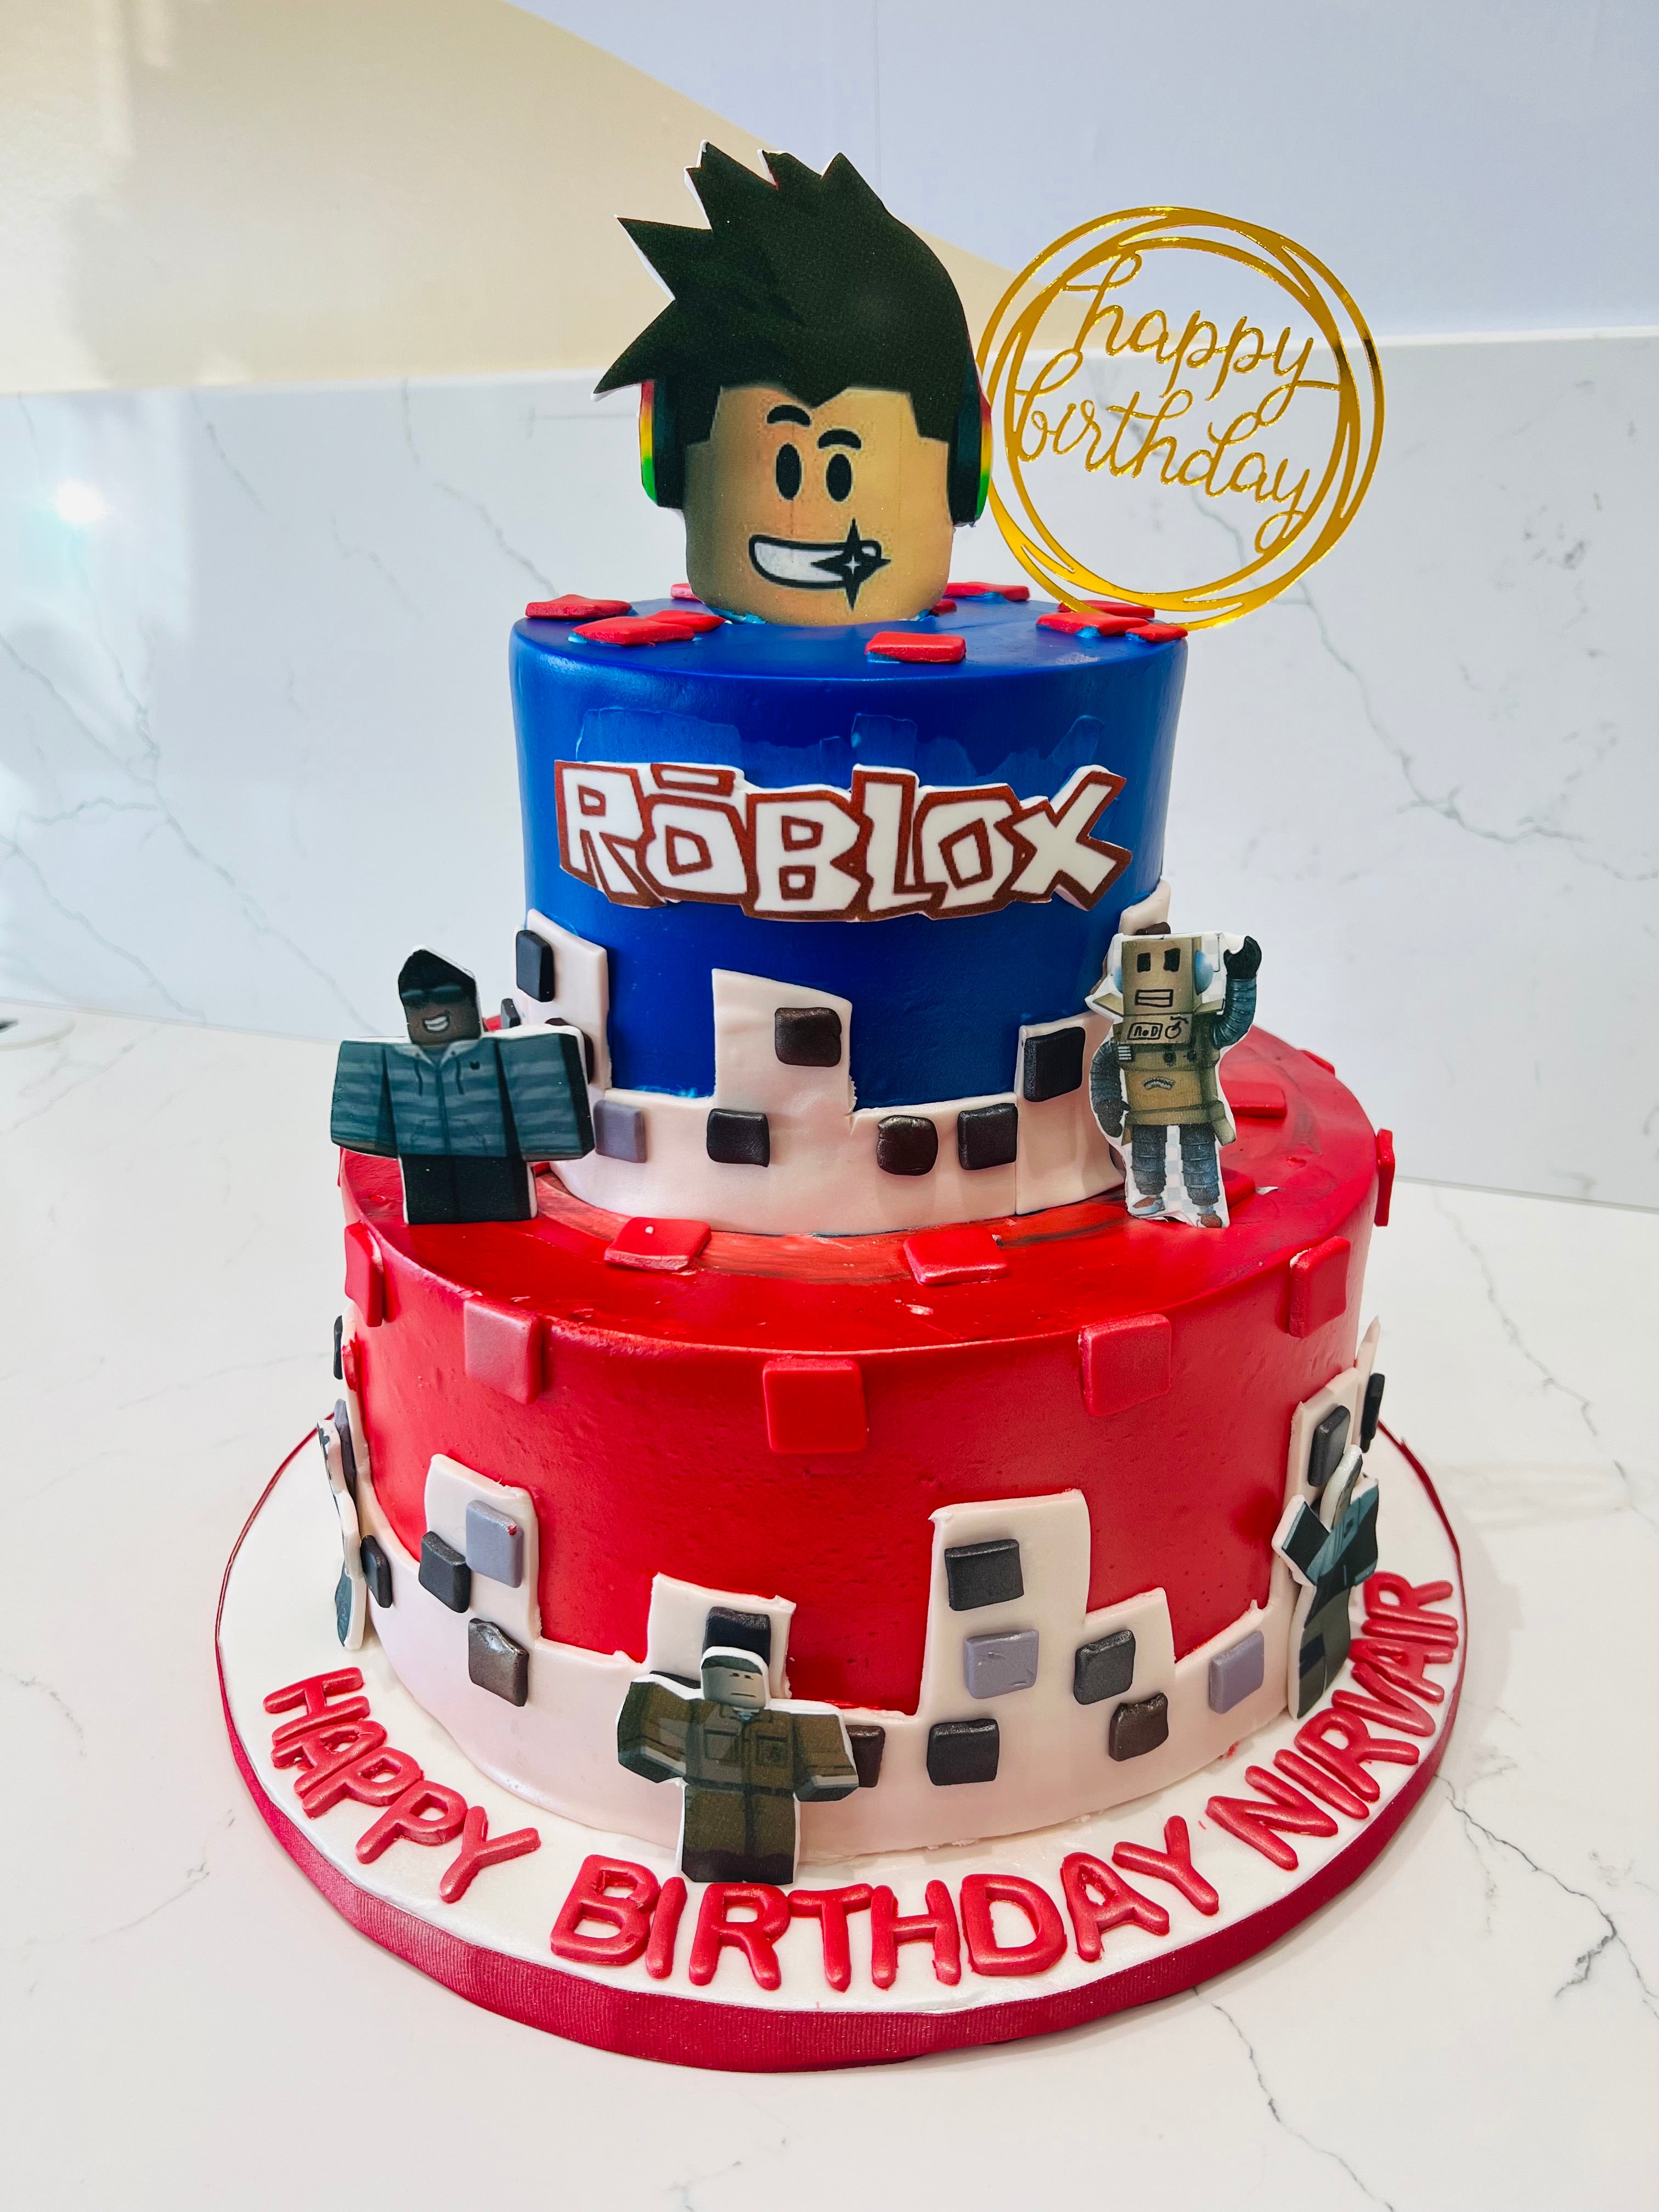 Online Cake Delivery for Boys | Free Shipping